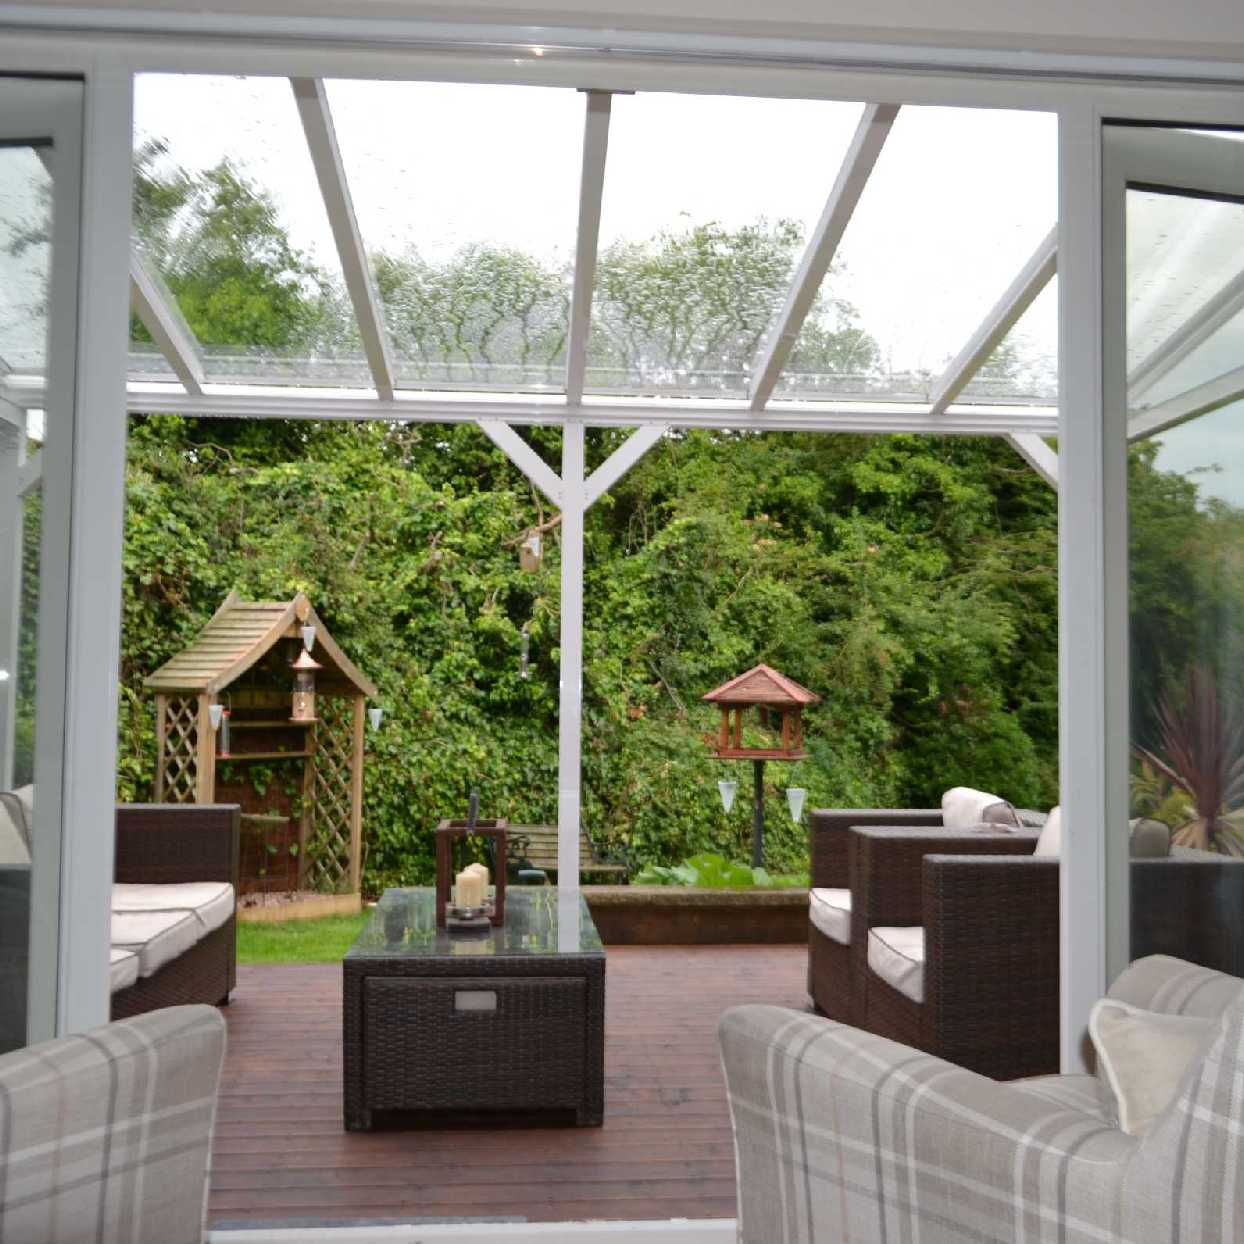 Buy Omega Smart Free-Standing, White MonoPitch Roof Canopy with 6mm Glass Clear Plate Polycarbonate Glazing - 4.9m (W) x 2.5m (P), (6) Supporting Posts online today